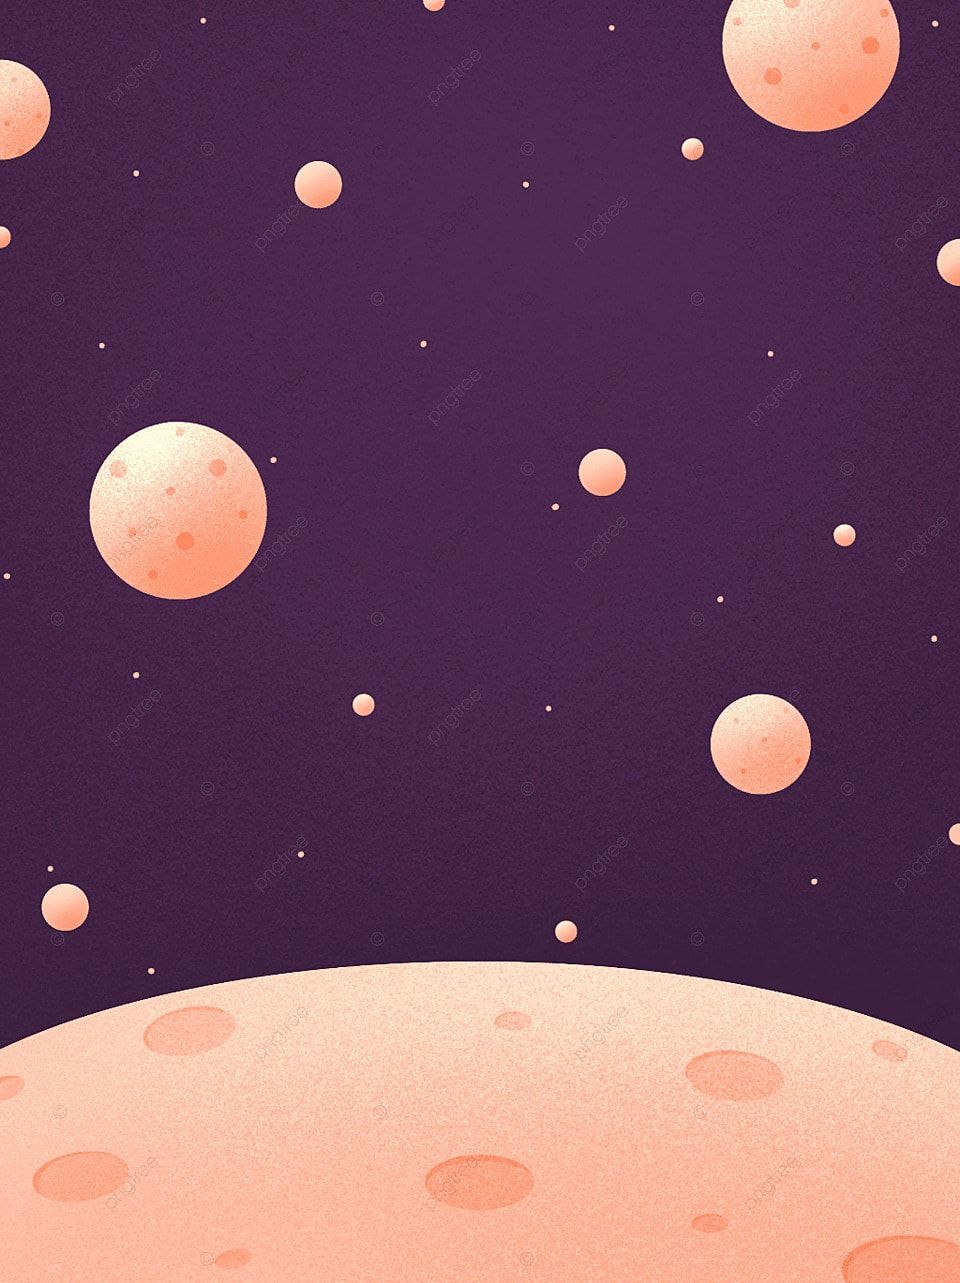 A deep purple background with a deep orange planet at the bottom. - Planet, illustration